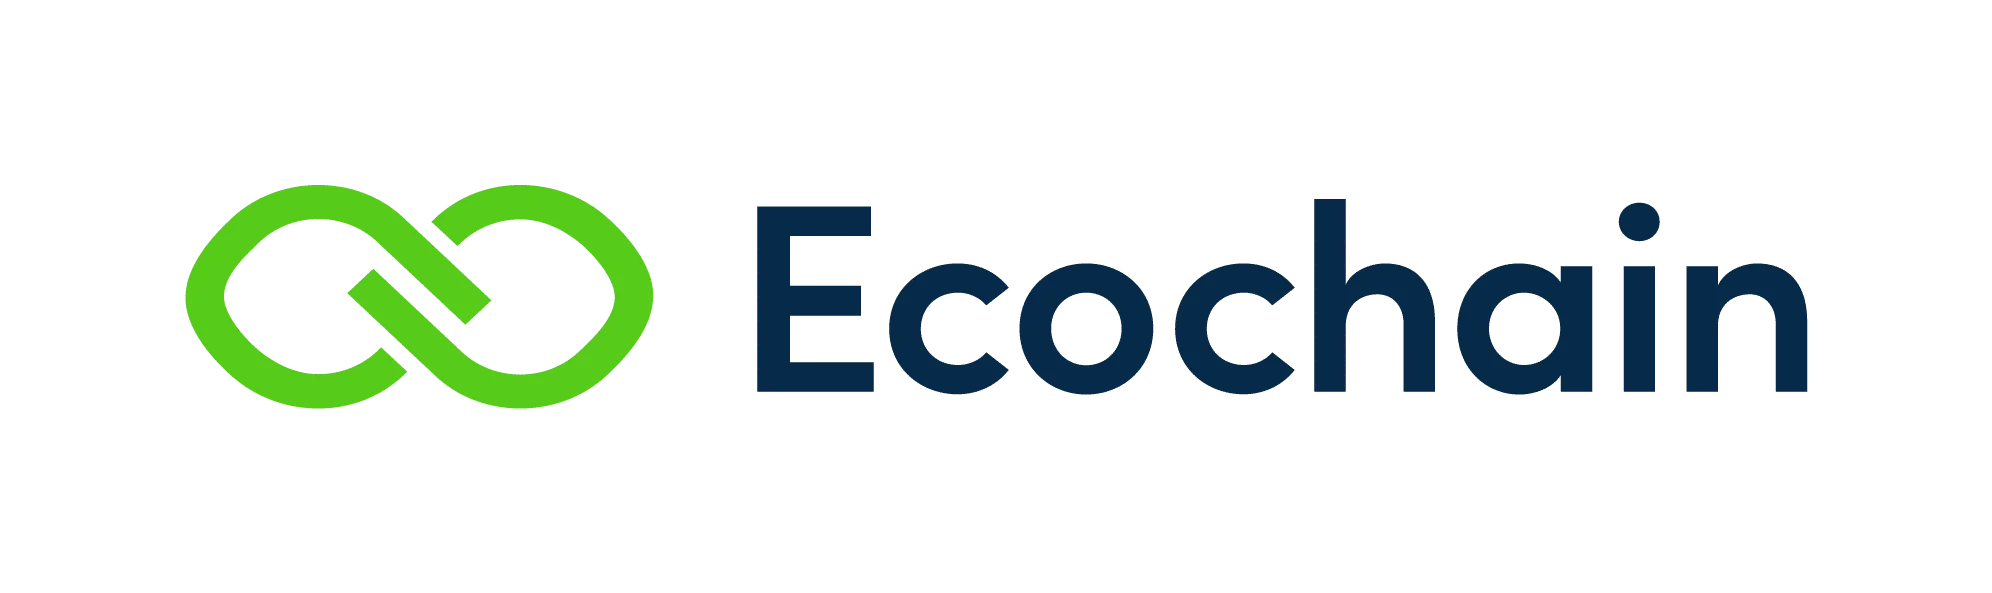 Stakeholder Event EPD Automation | Sponsor - Ecochain